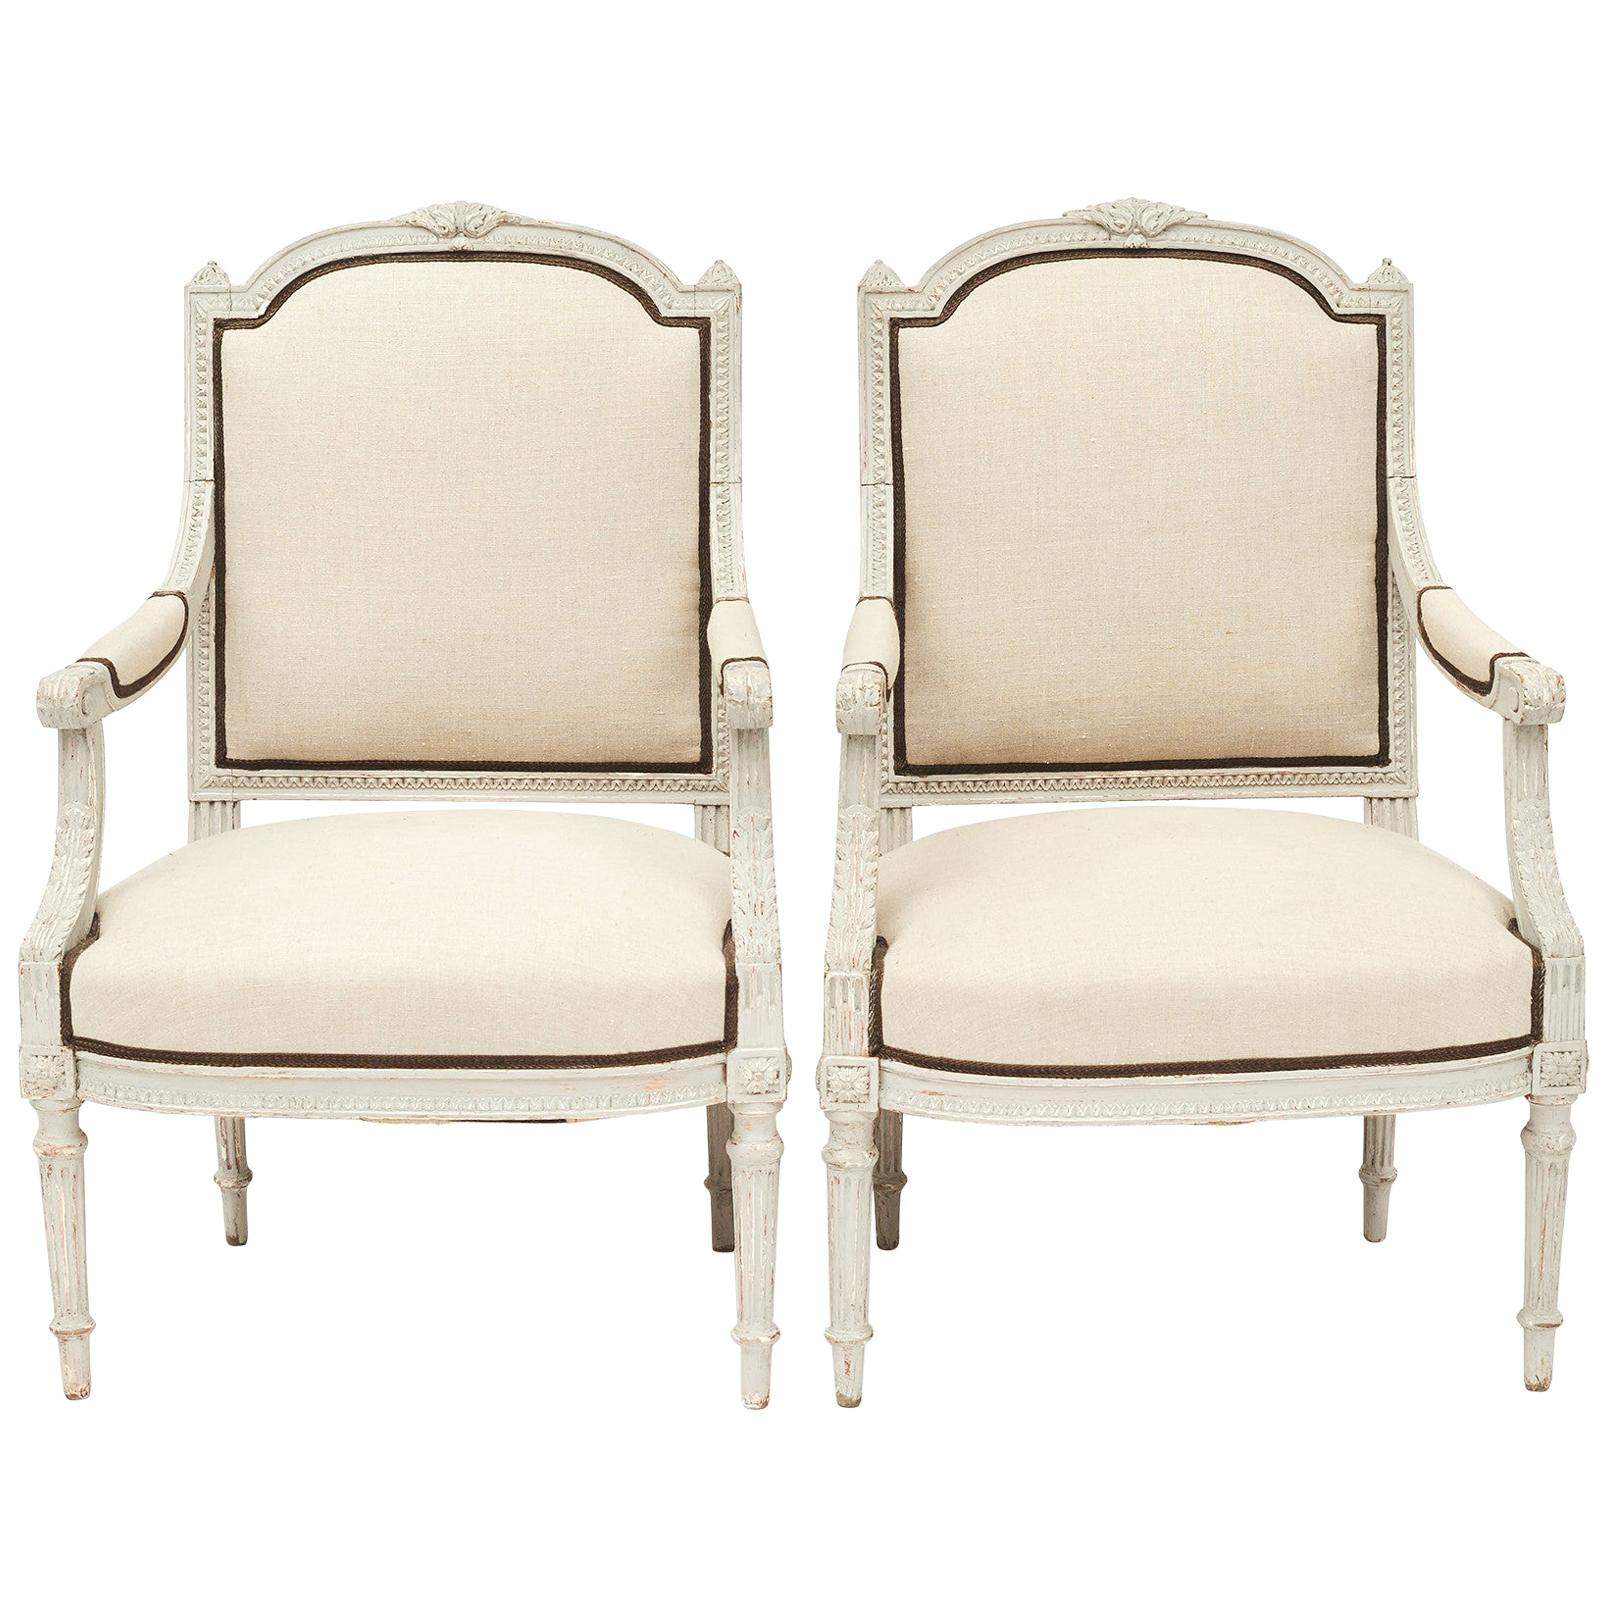 Pair of French Armchairs in the Style of Louis XVI